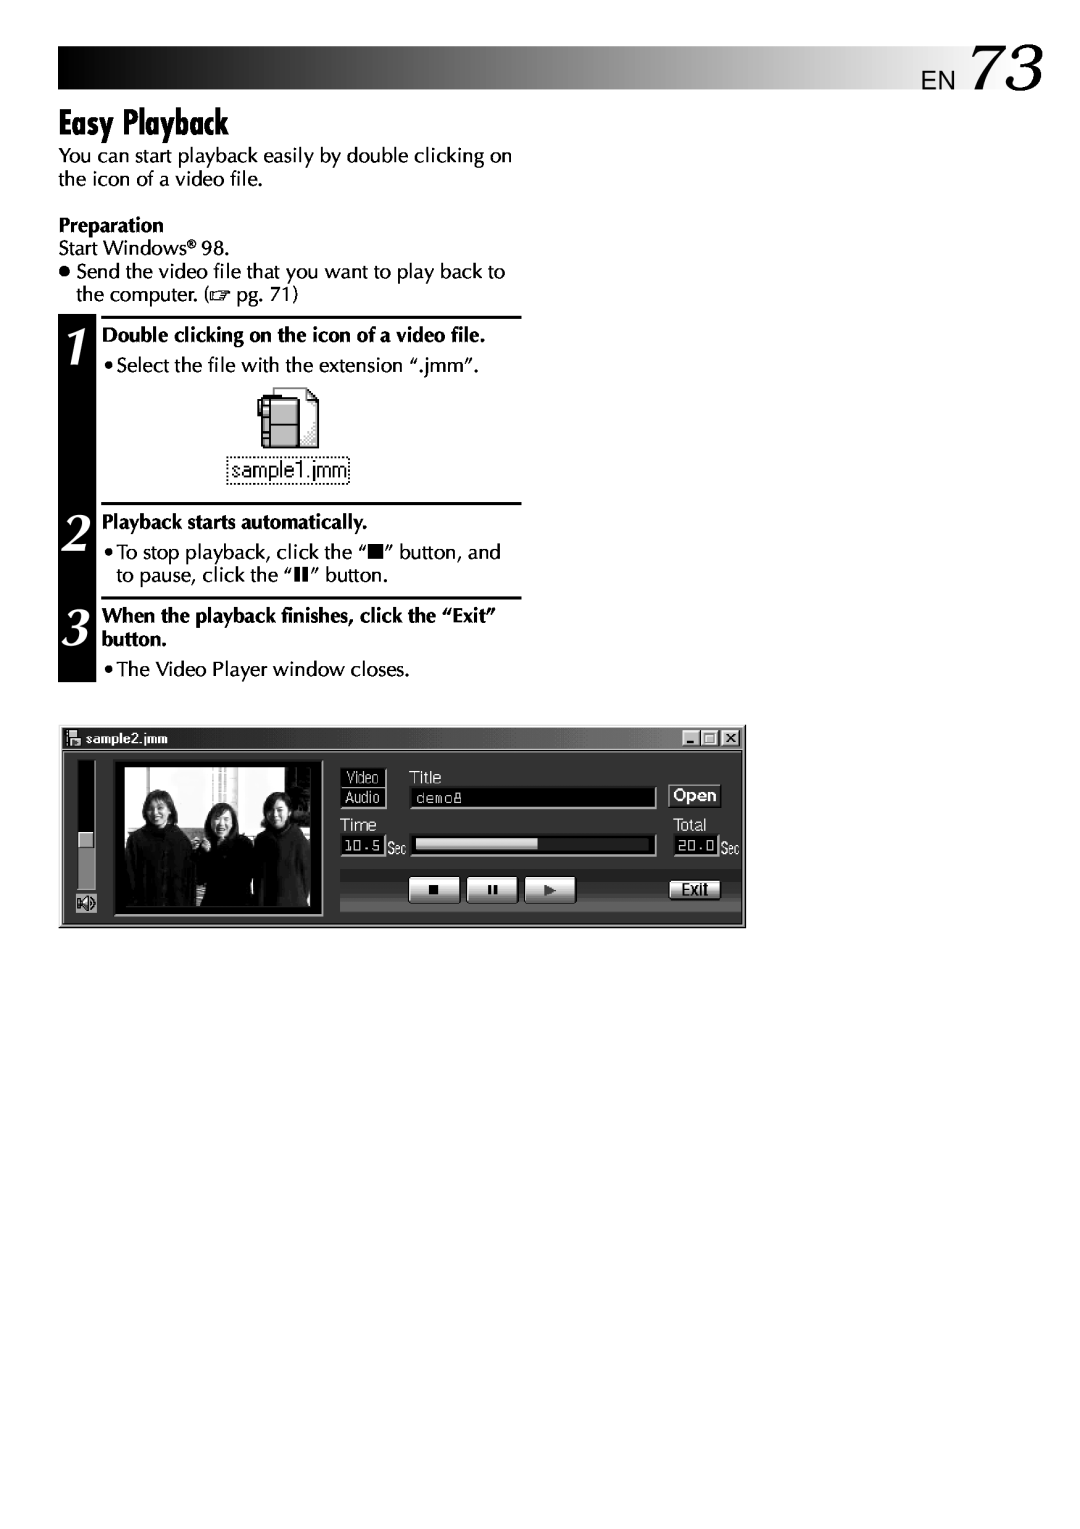 JVC GC-QX3 Easy Playback, EN73, Preparation, Double clicking on the icon of a video file, Playback starts automatically 